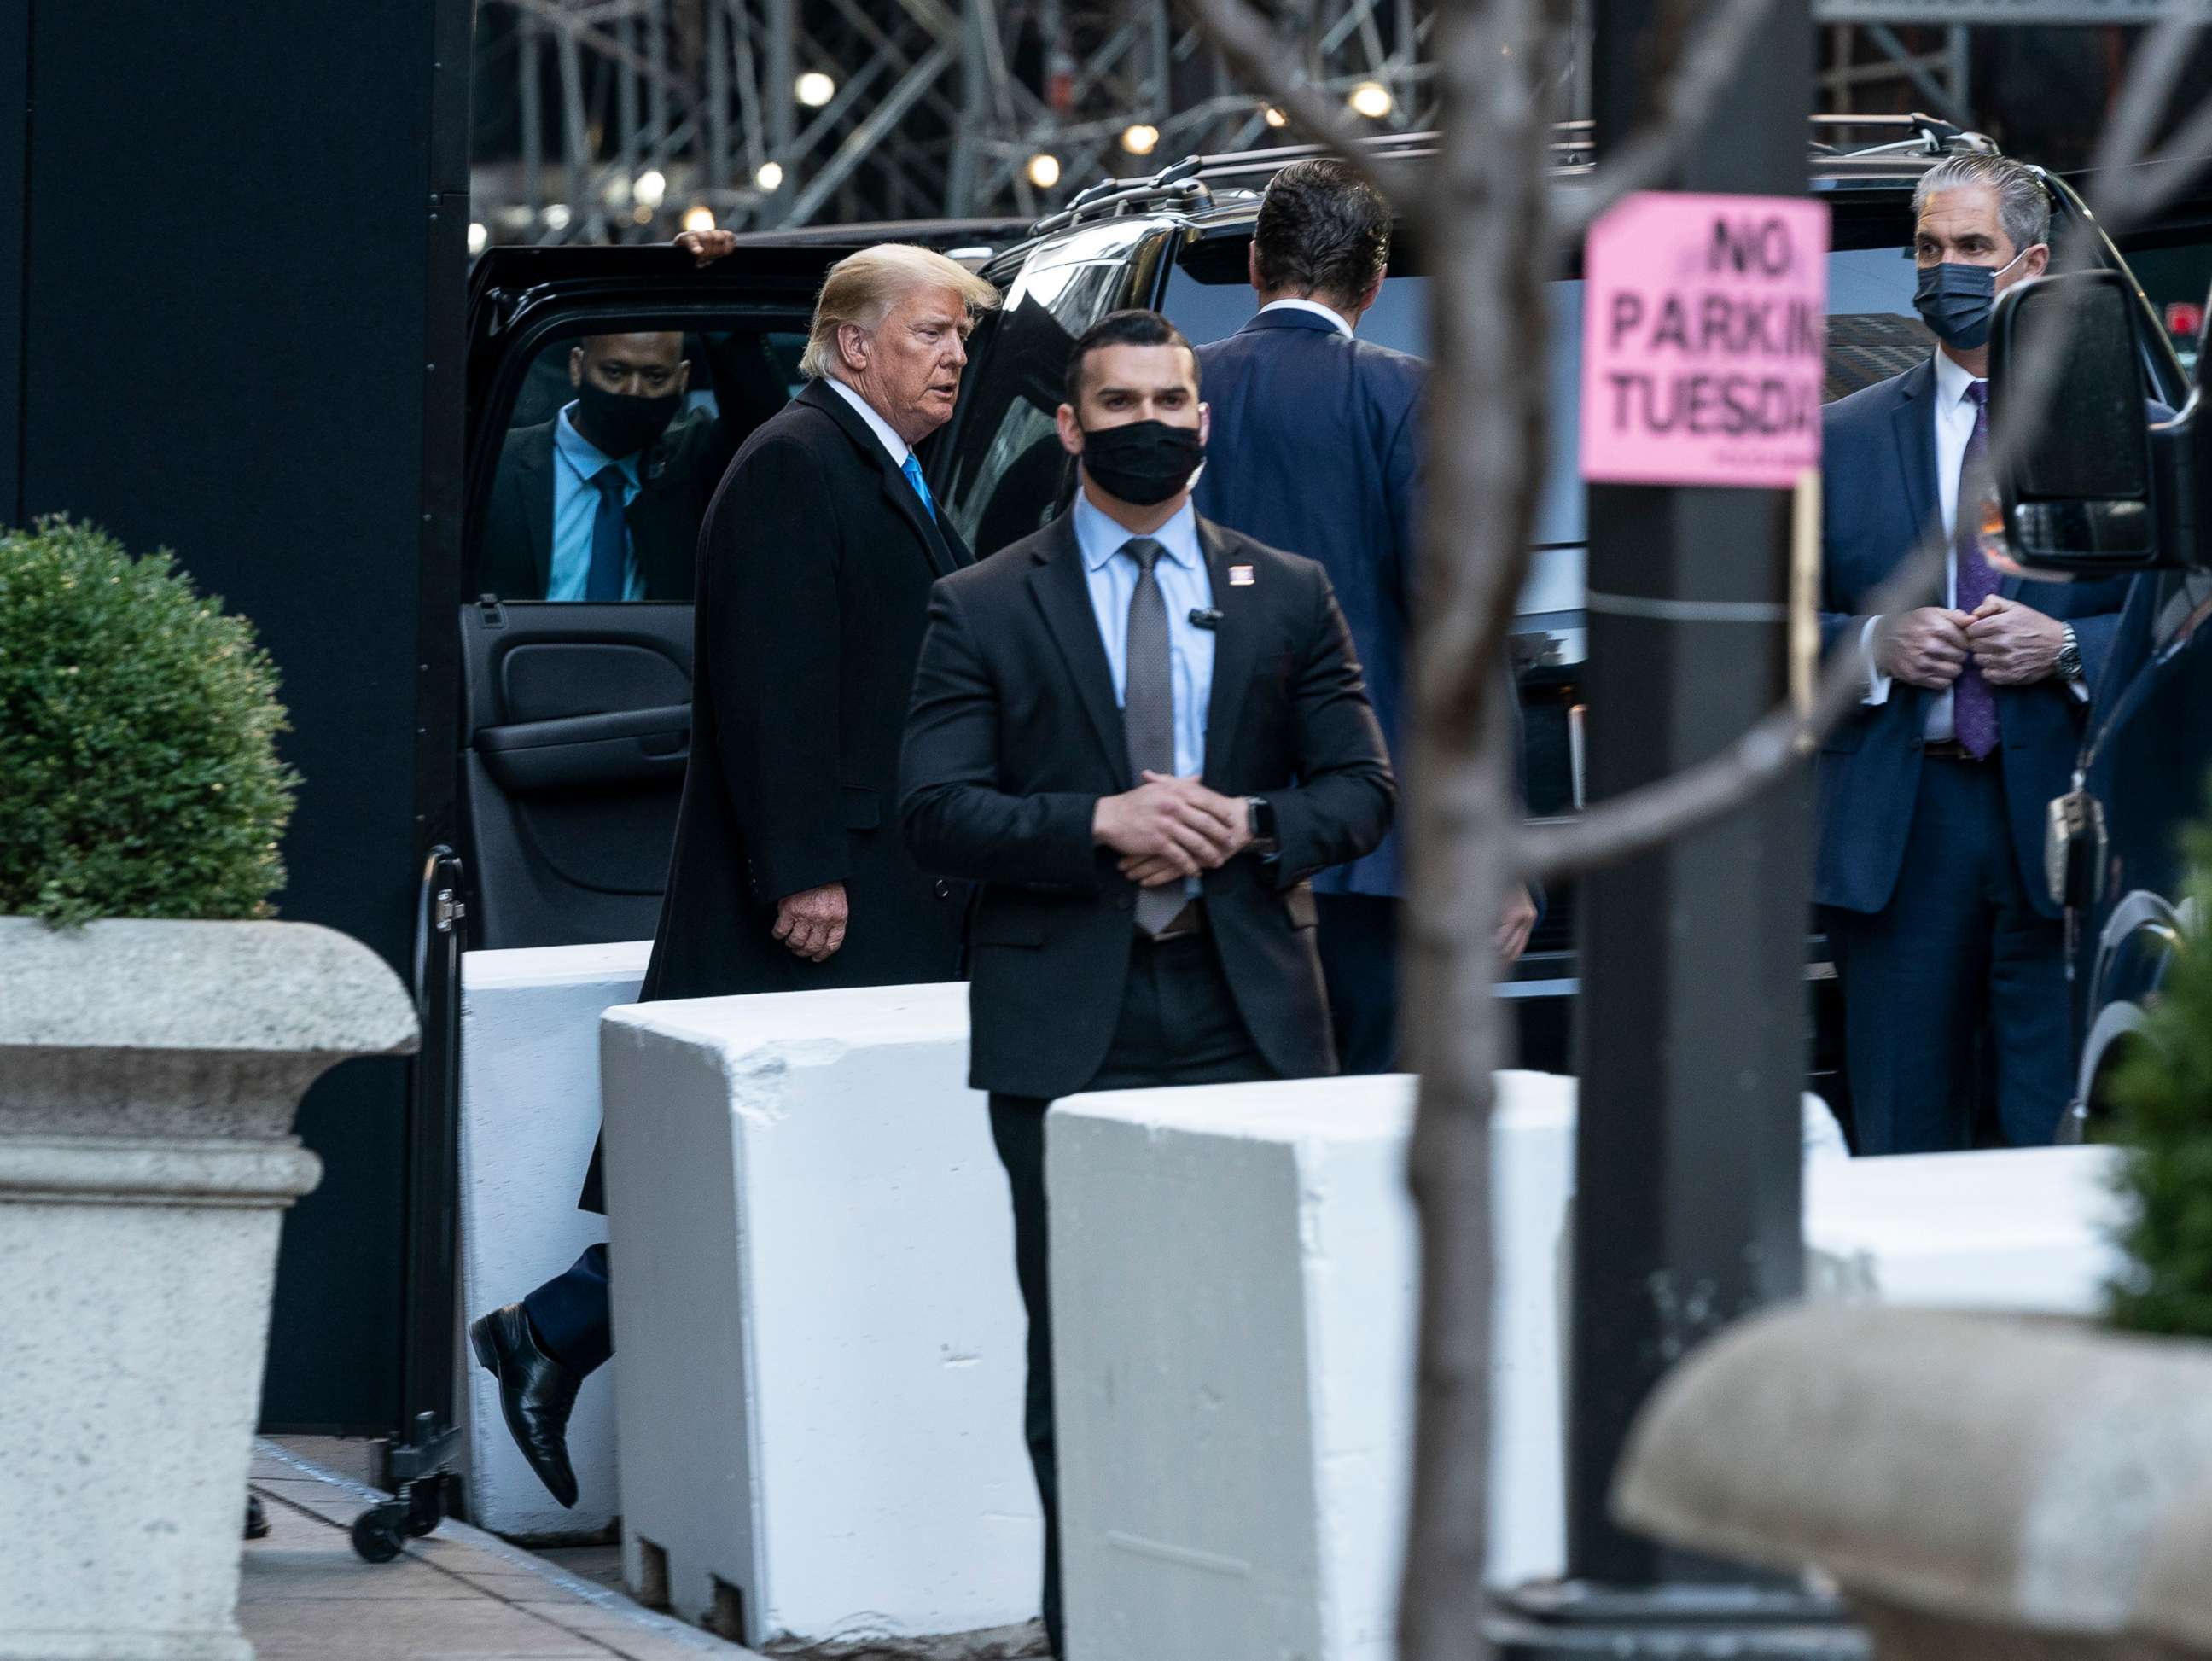 PHOTO: Former President Donald Trump departs Trump Tower after visiting the city of New York, March 9, 2021.